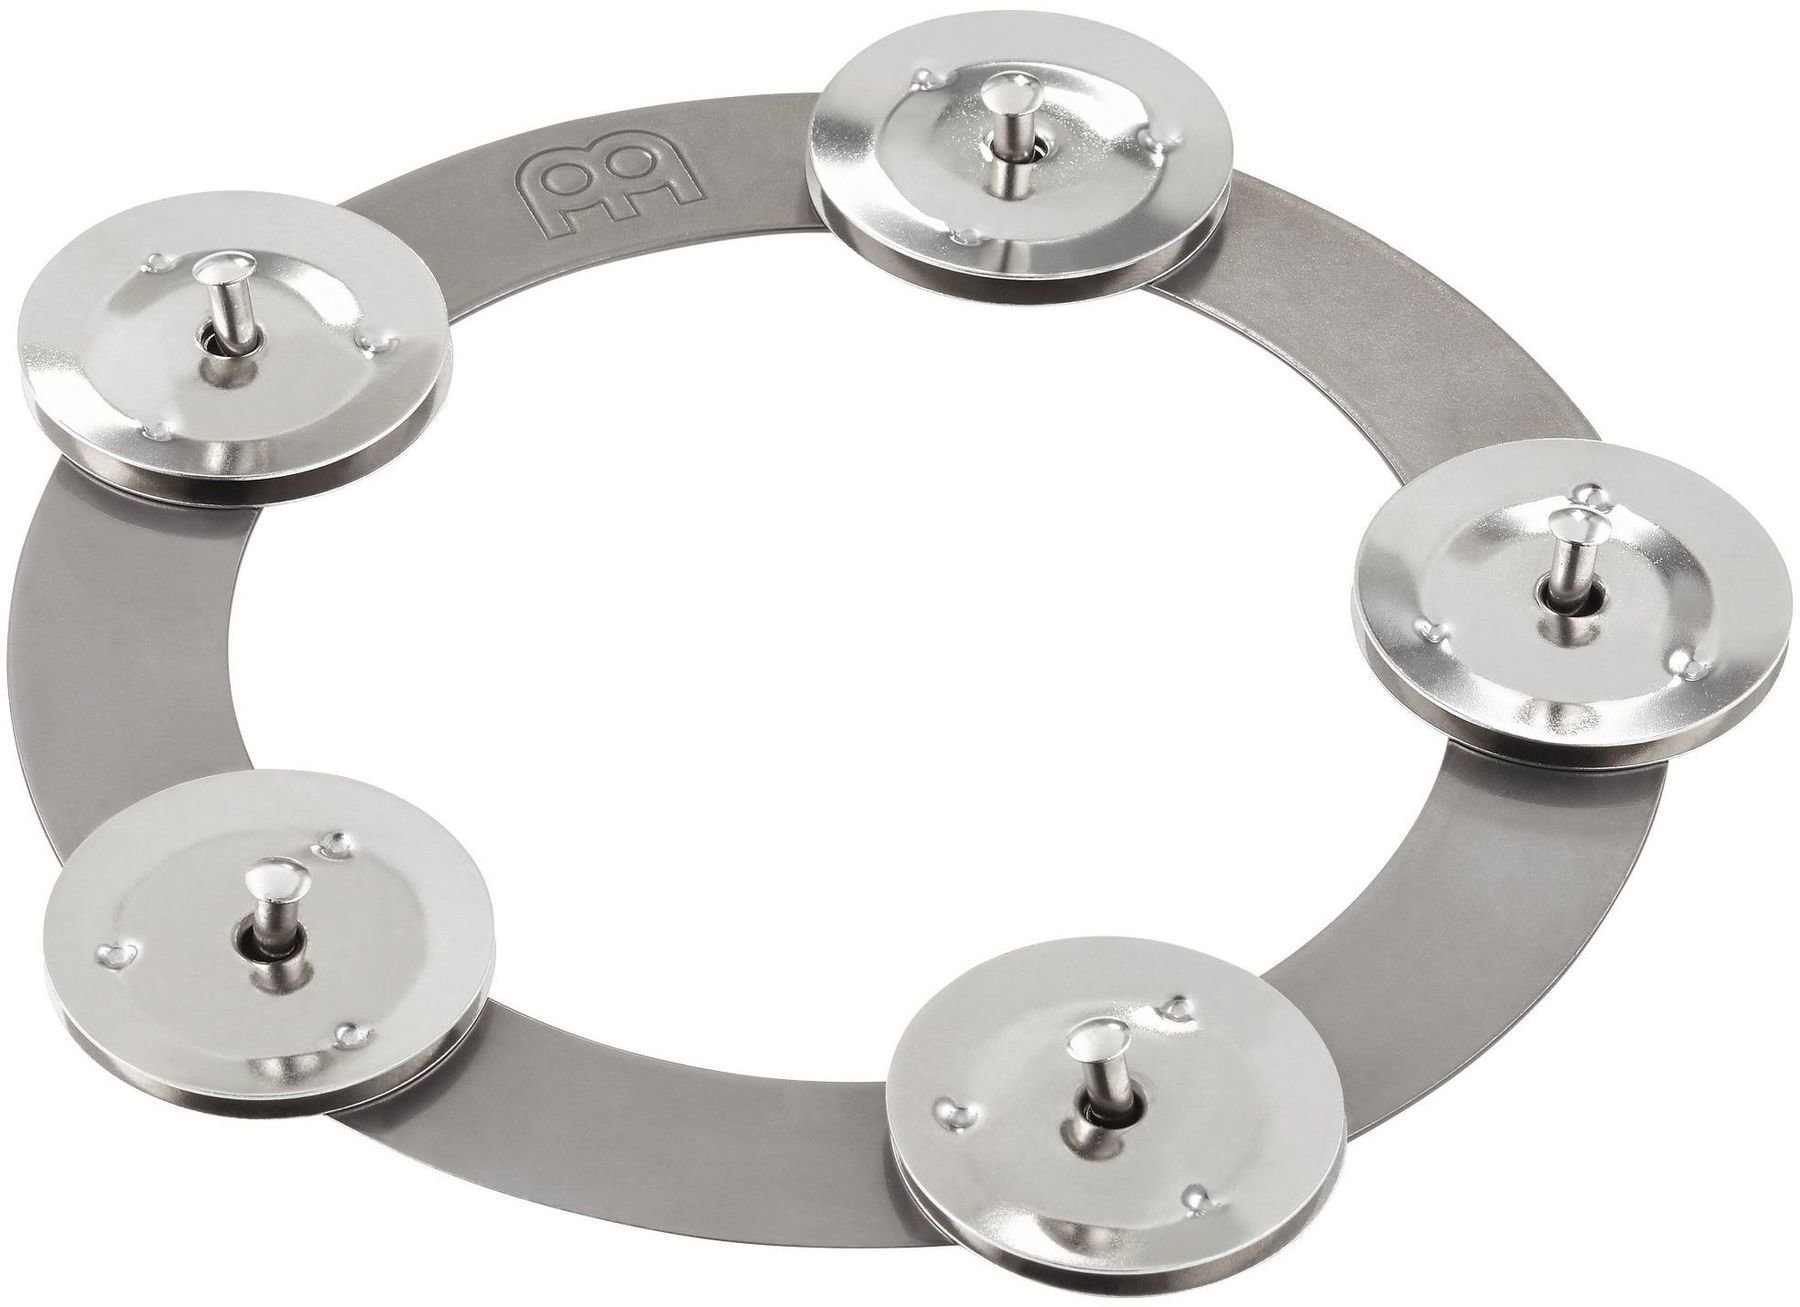 Tambourin montable Meinl Ching Ring